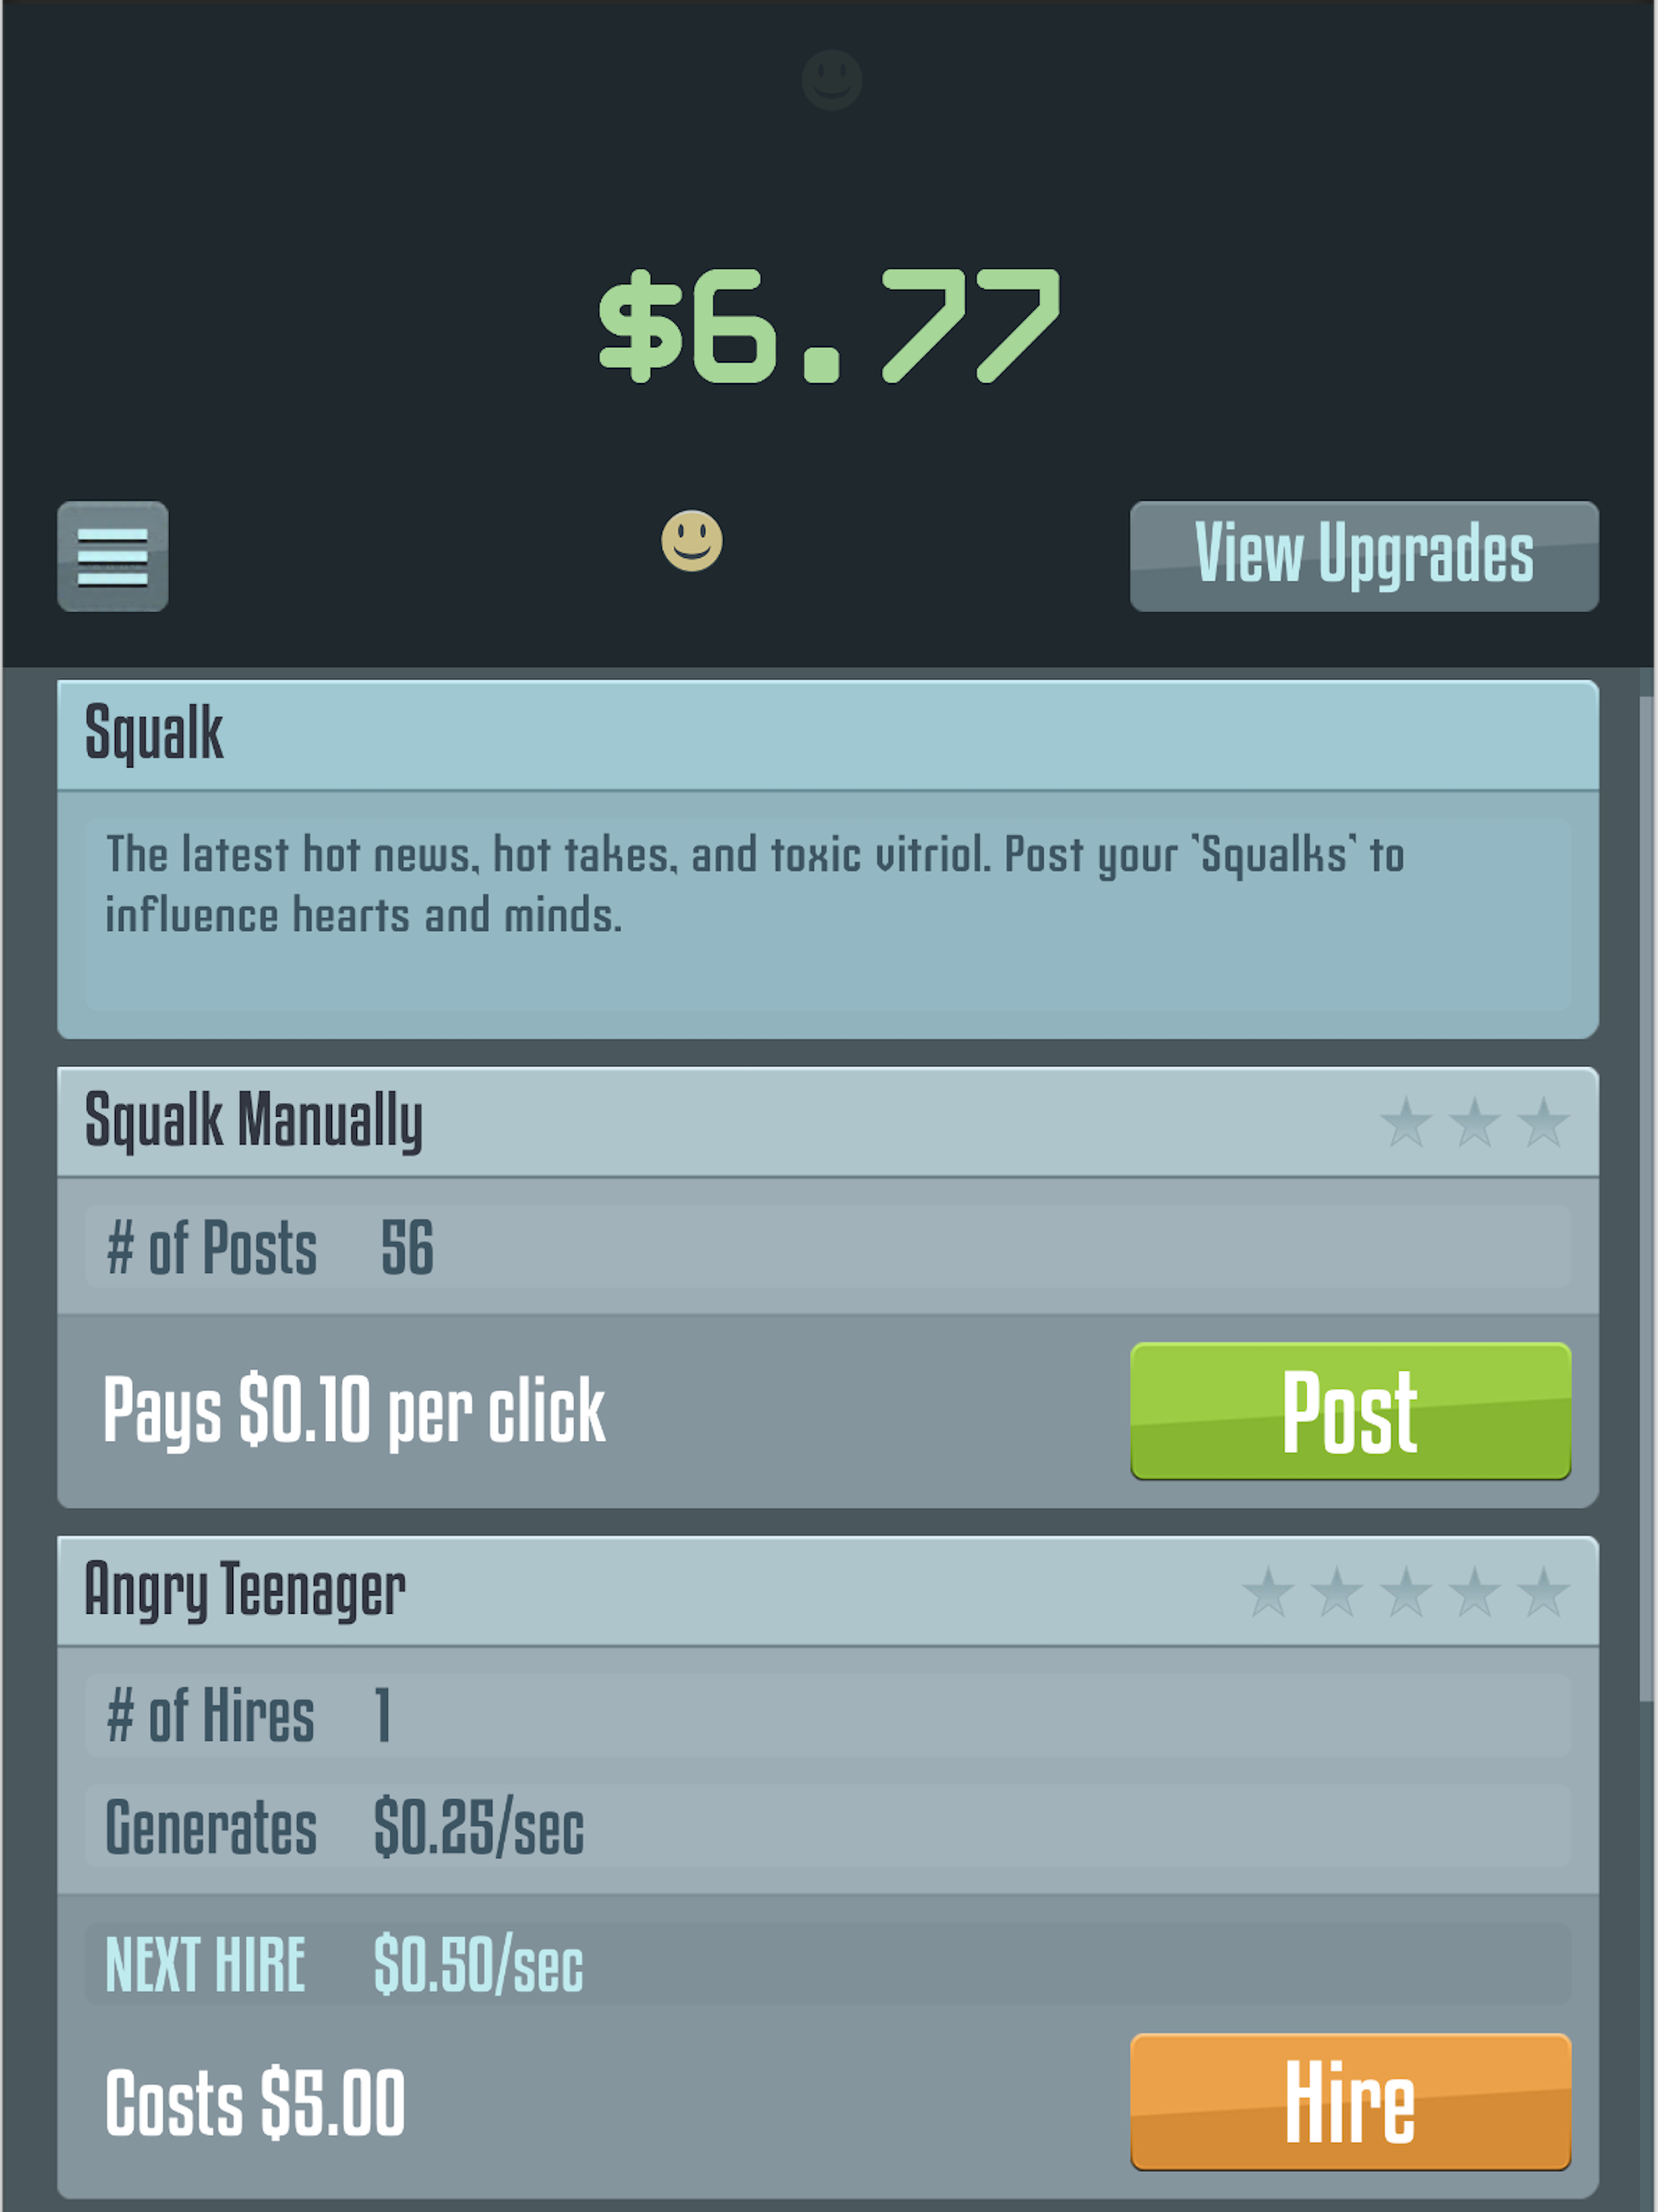 Idle clicker game that replicates the money and influence that troll farms have on society 